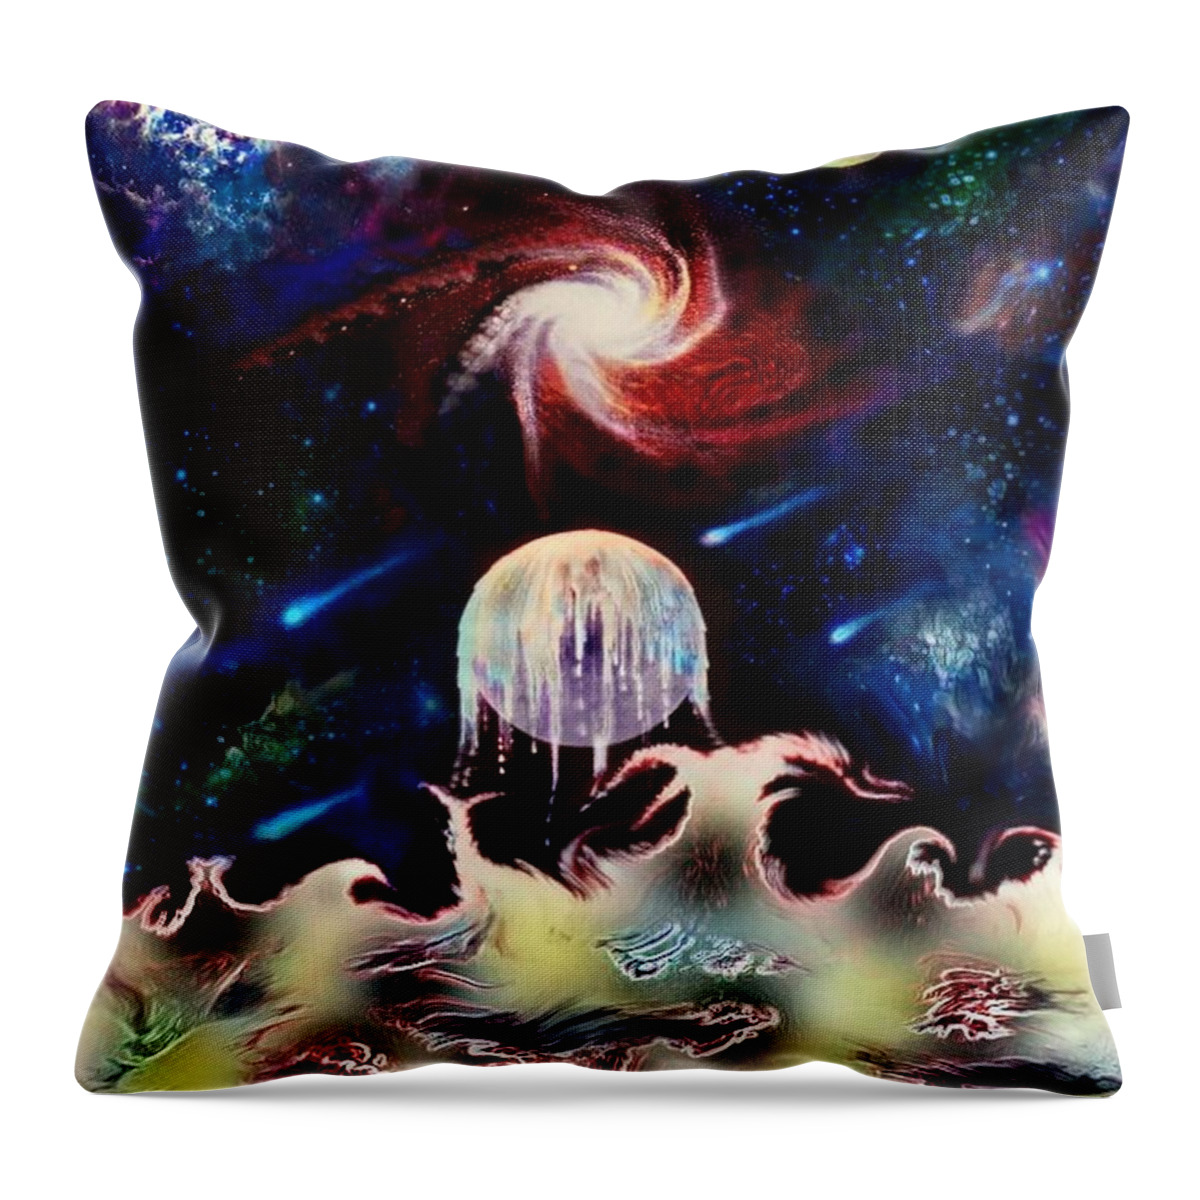 Space Throw Pillow featuring the digital art Restless by David Neace CPX